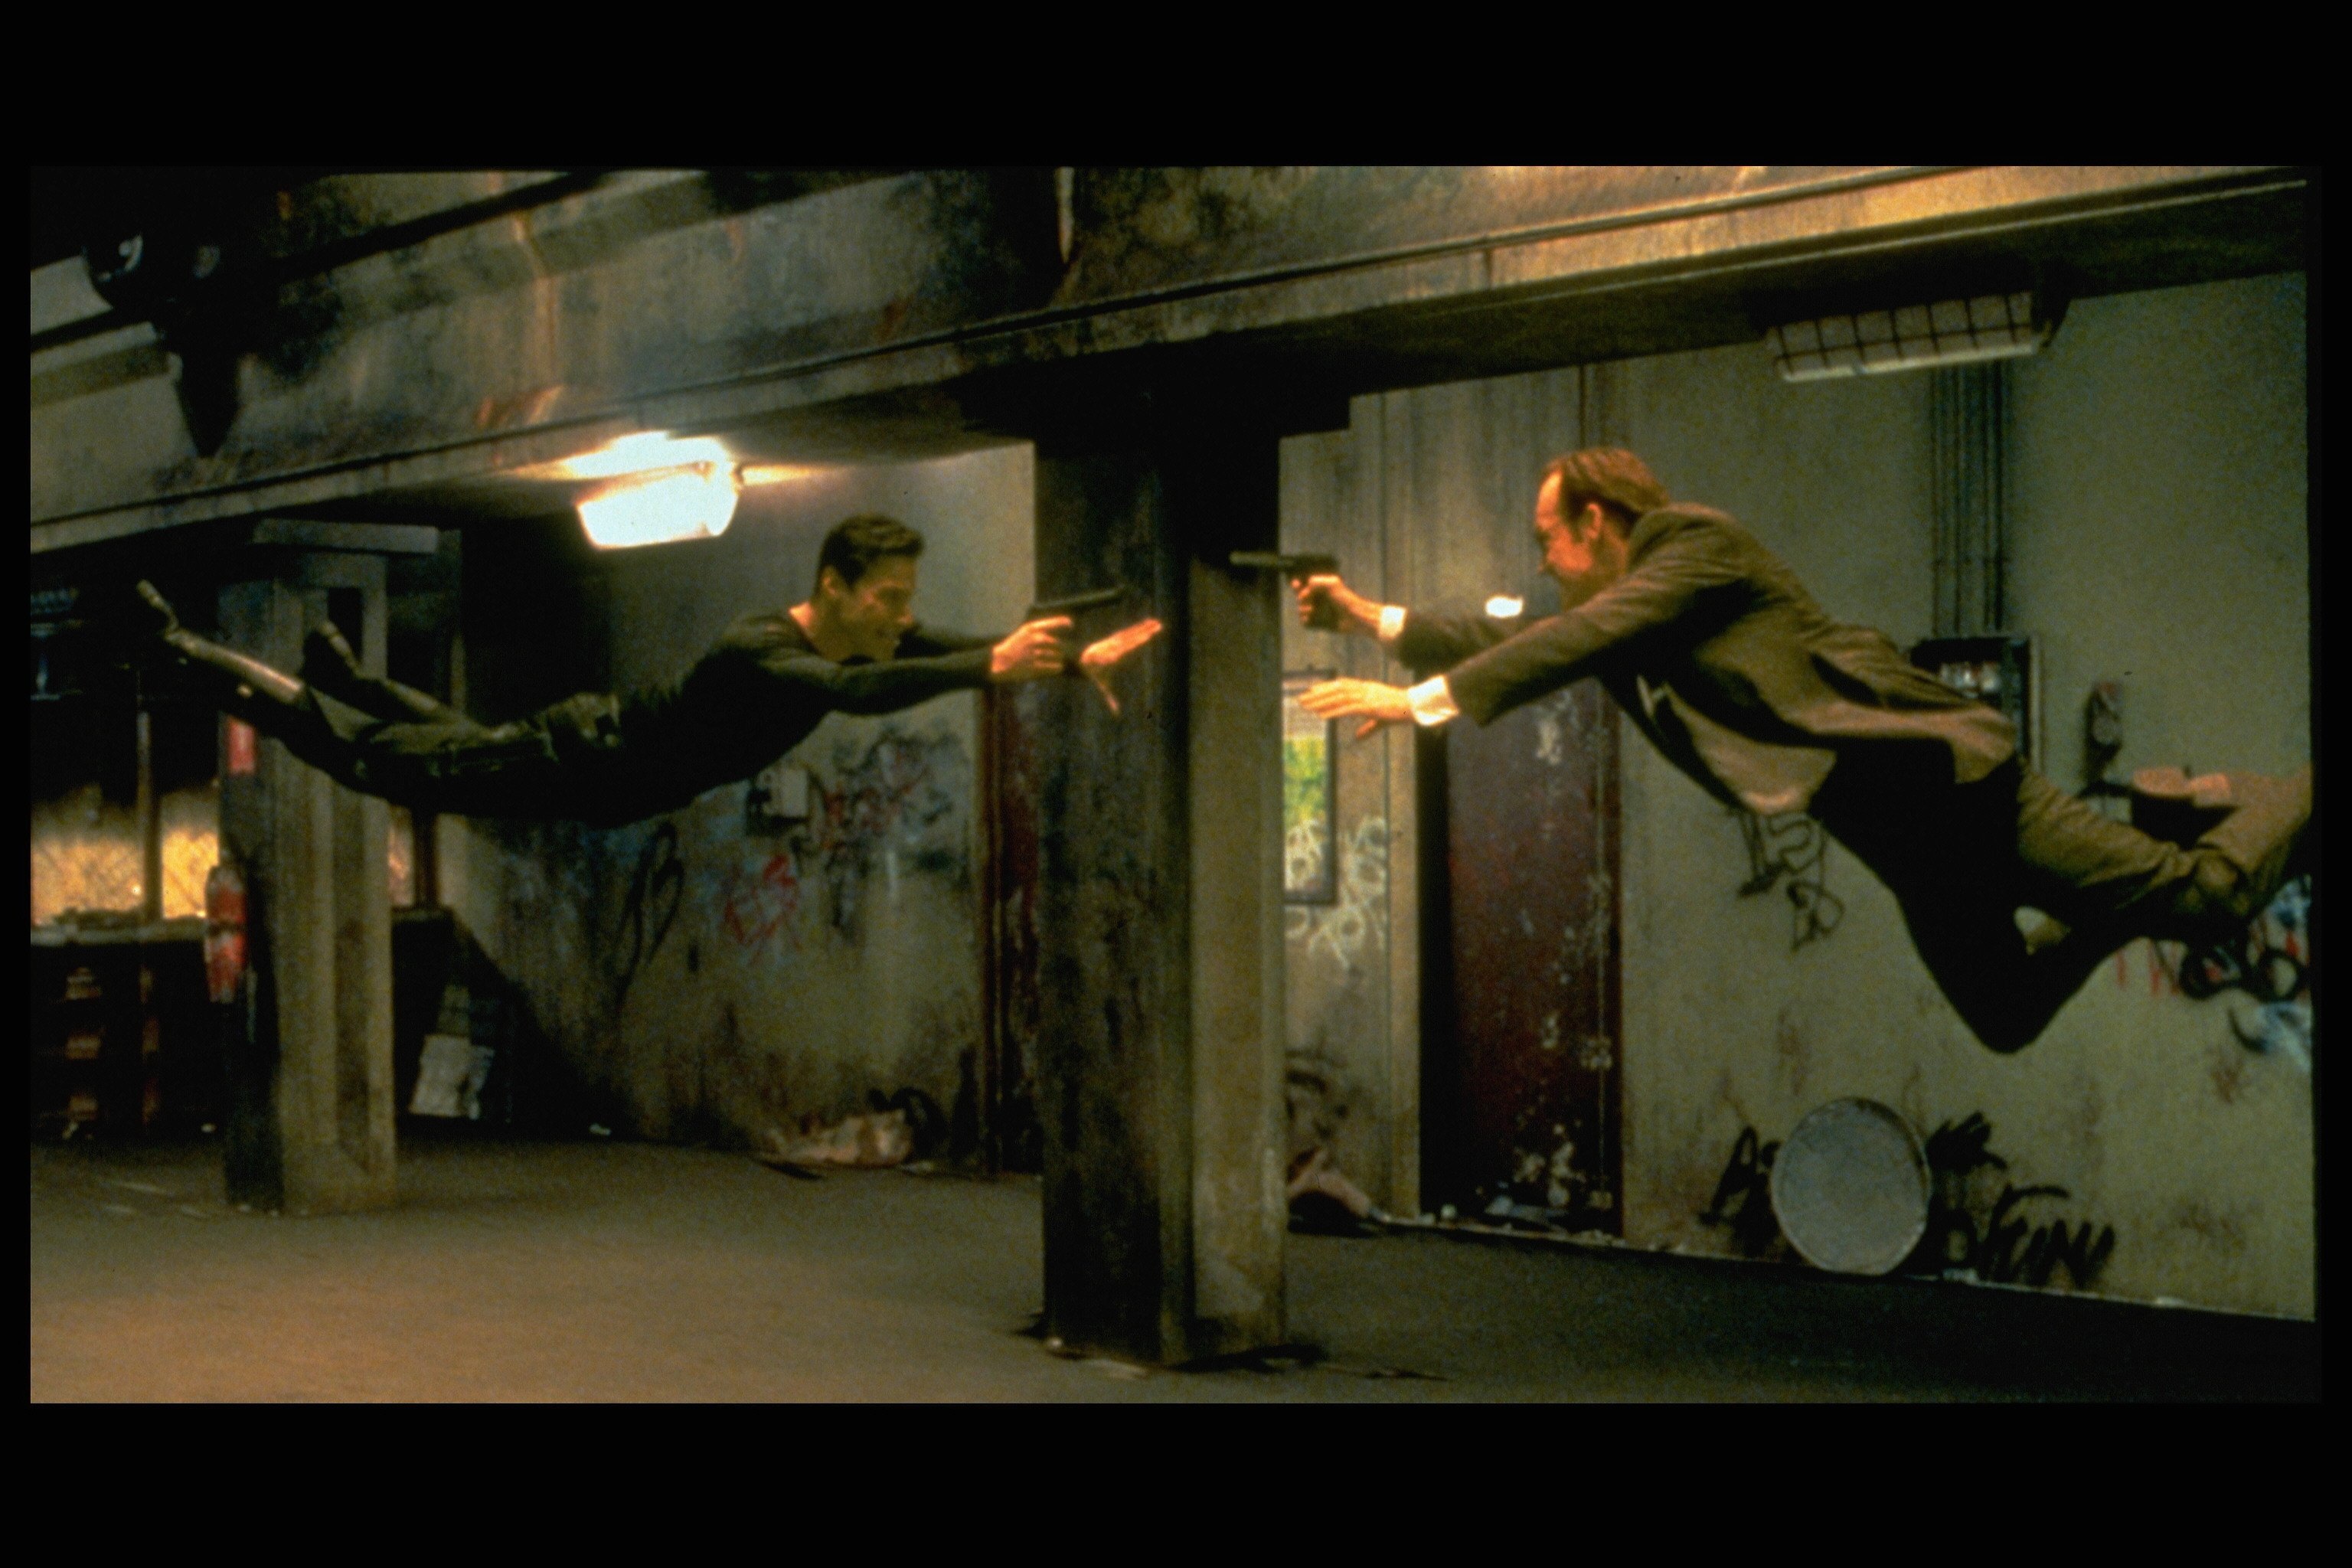 'The Matrix' cast members Keanu Reeves and Hugo Weaving in a scene from the film.